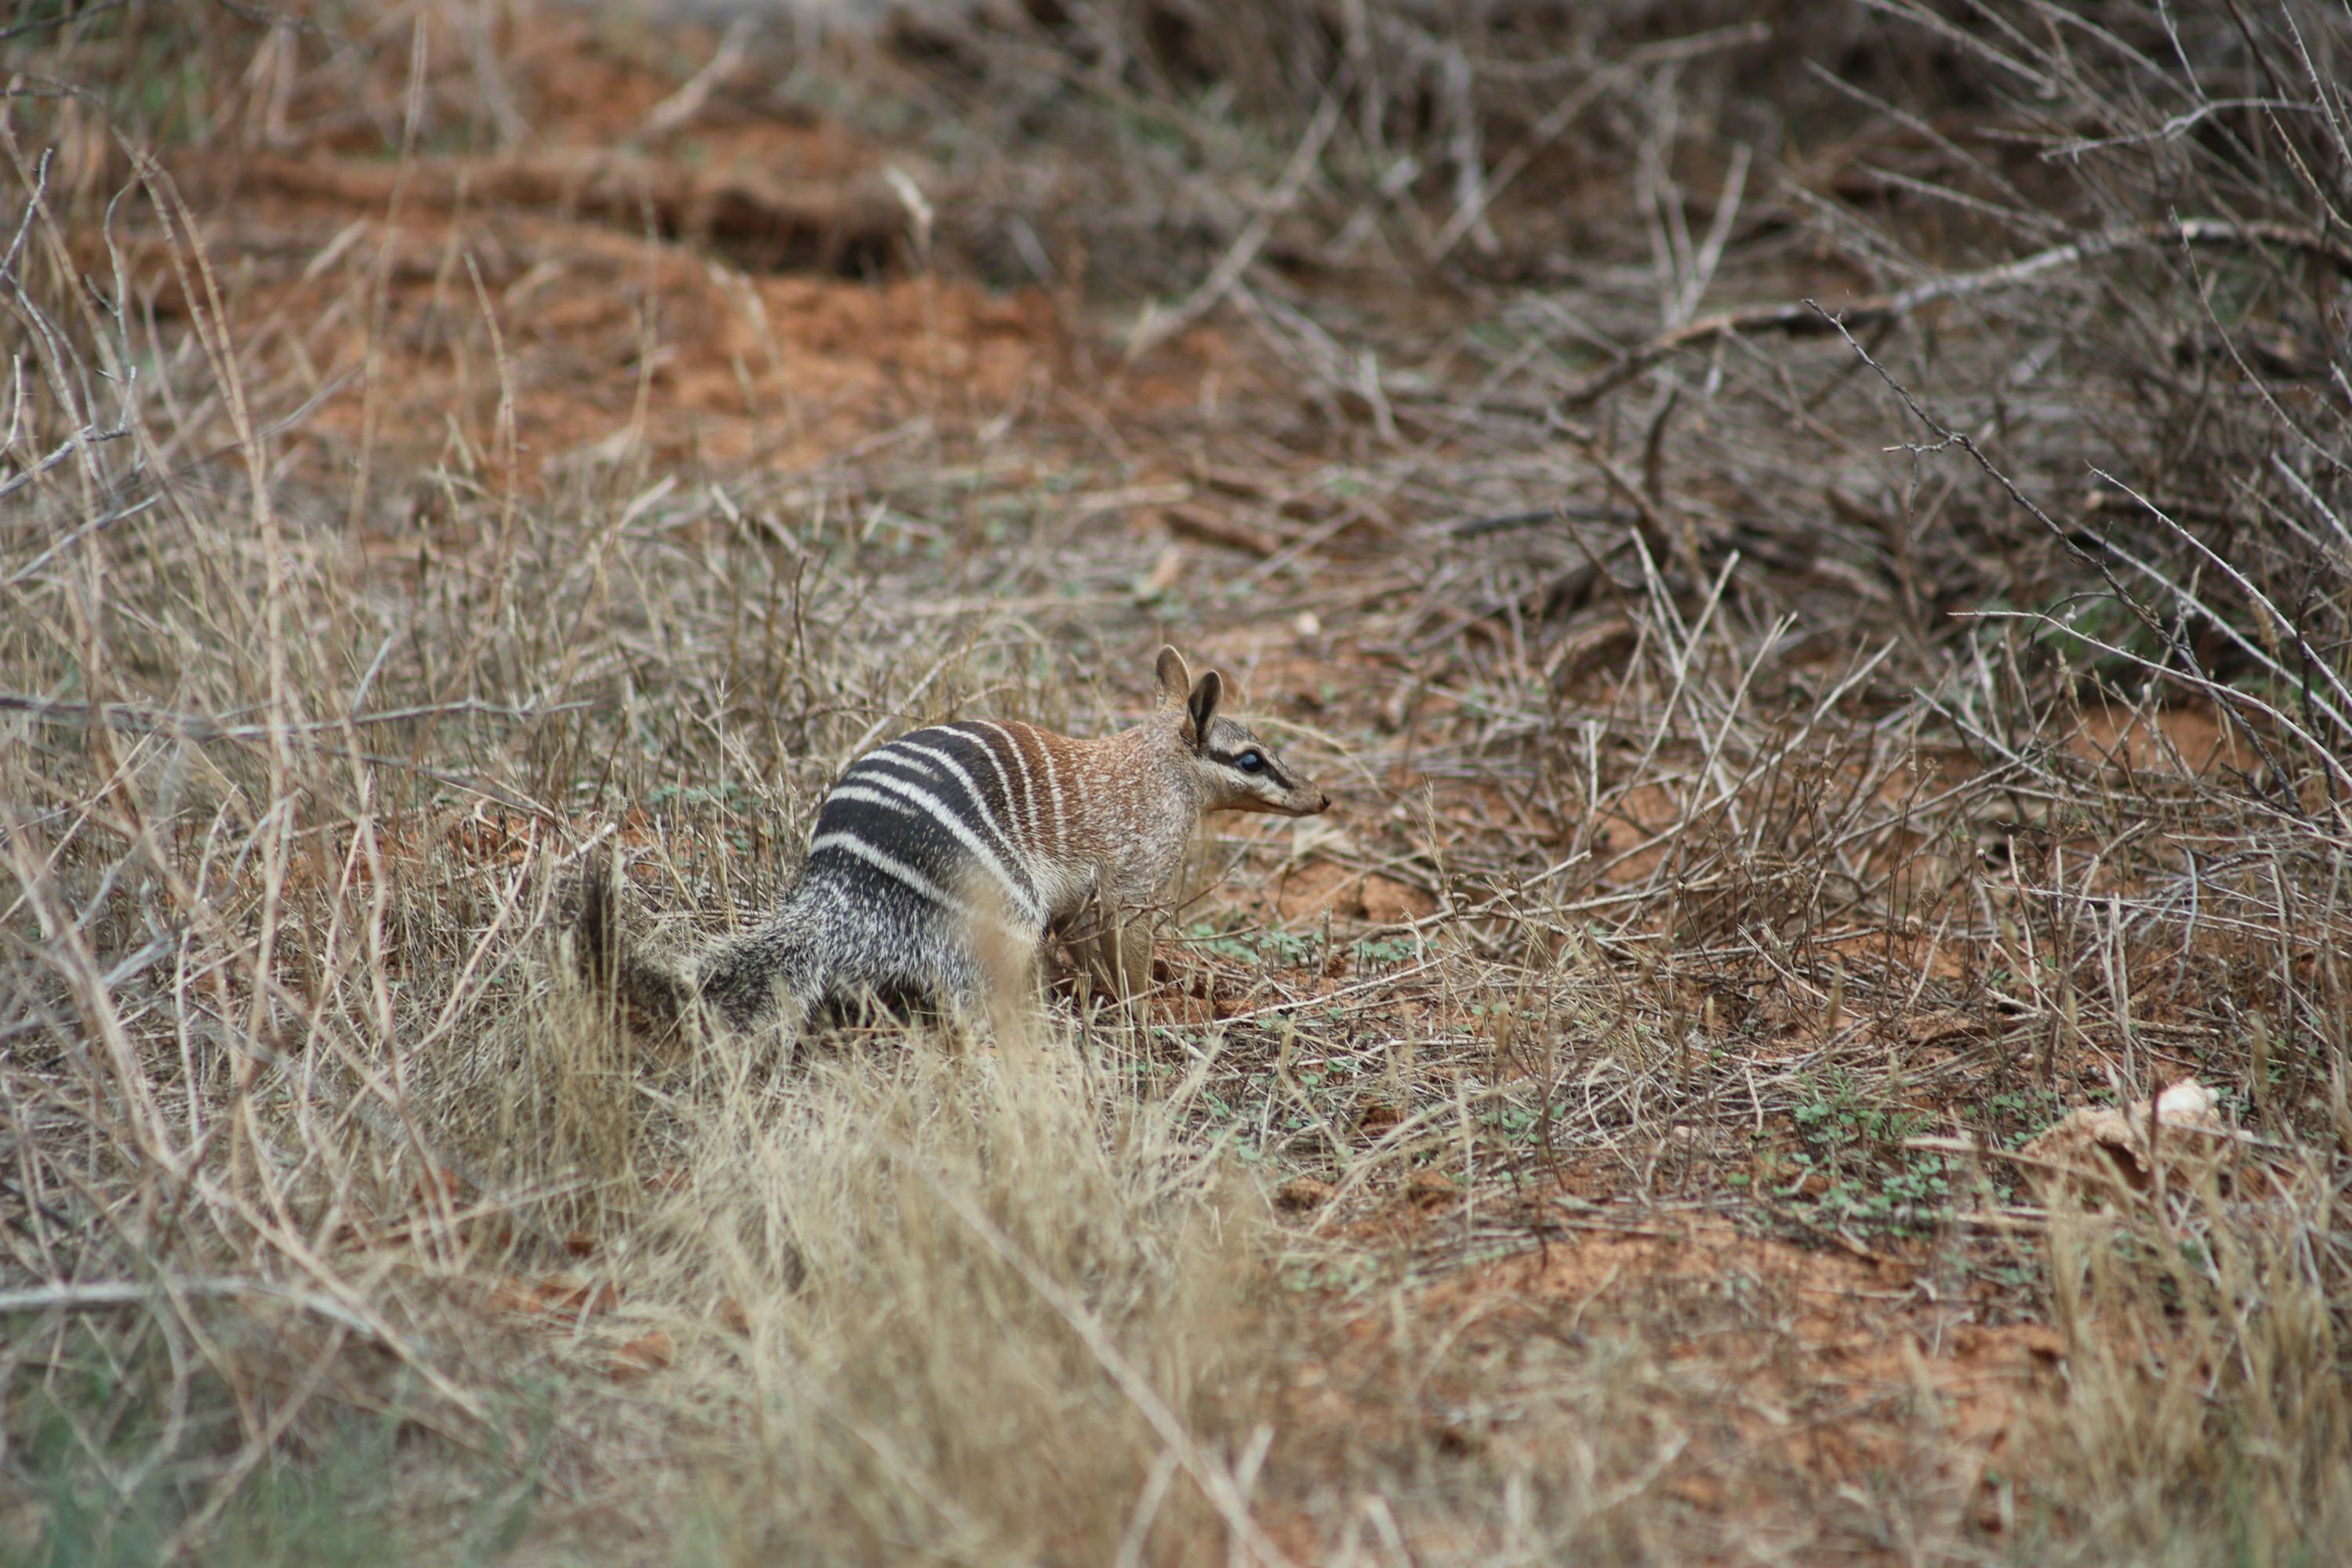 Numbat with its tail raised spotted searching for termites during a survey at Yookamurra
Wildlife Sanctuary in January 2024. (Credit: Alexandra Ross/Australian Wildlife Conservancy)